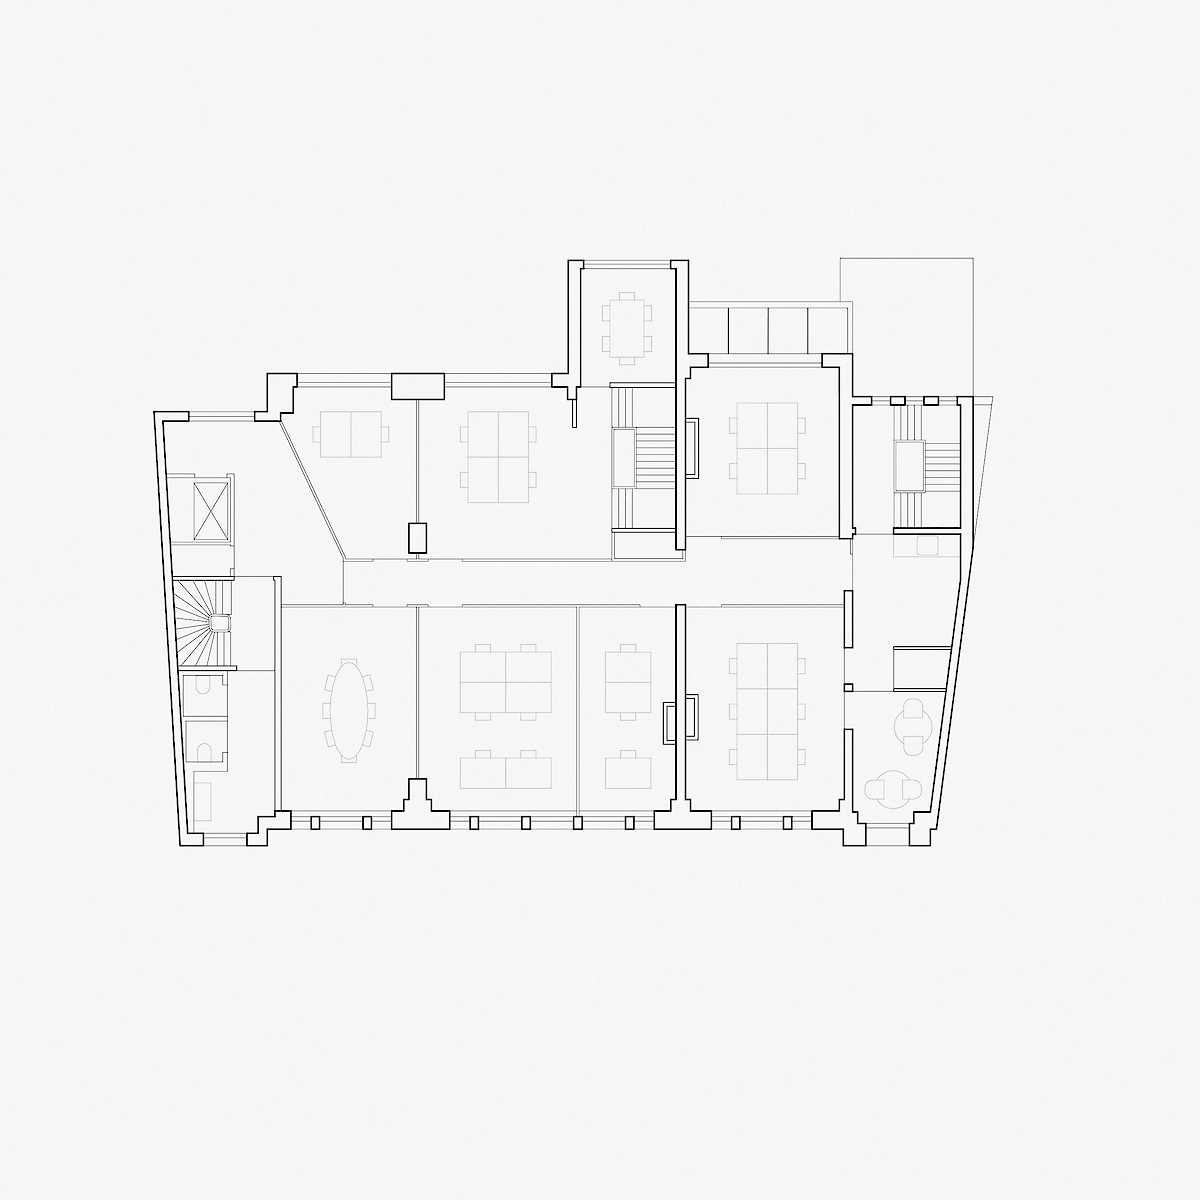 Second floor with office layout